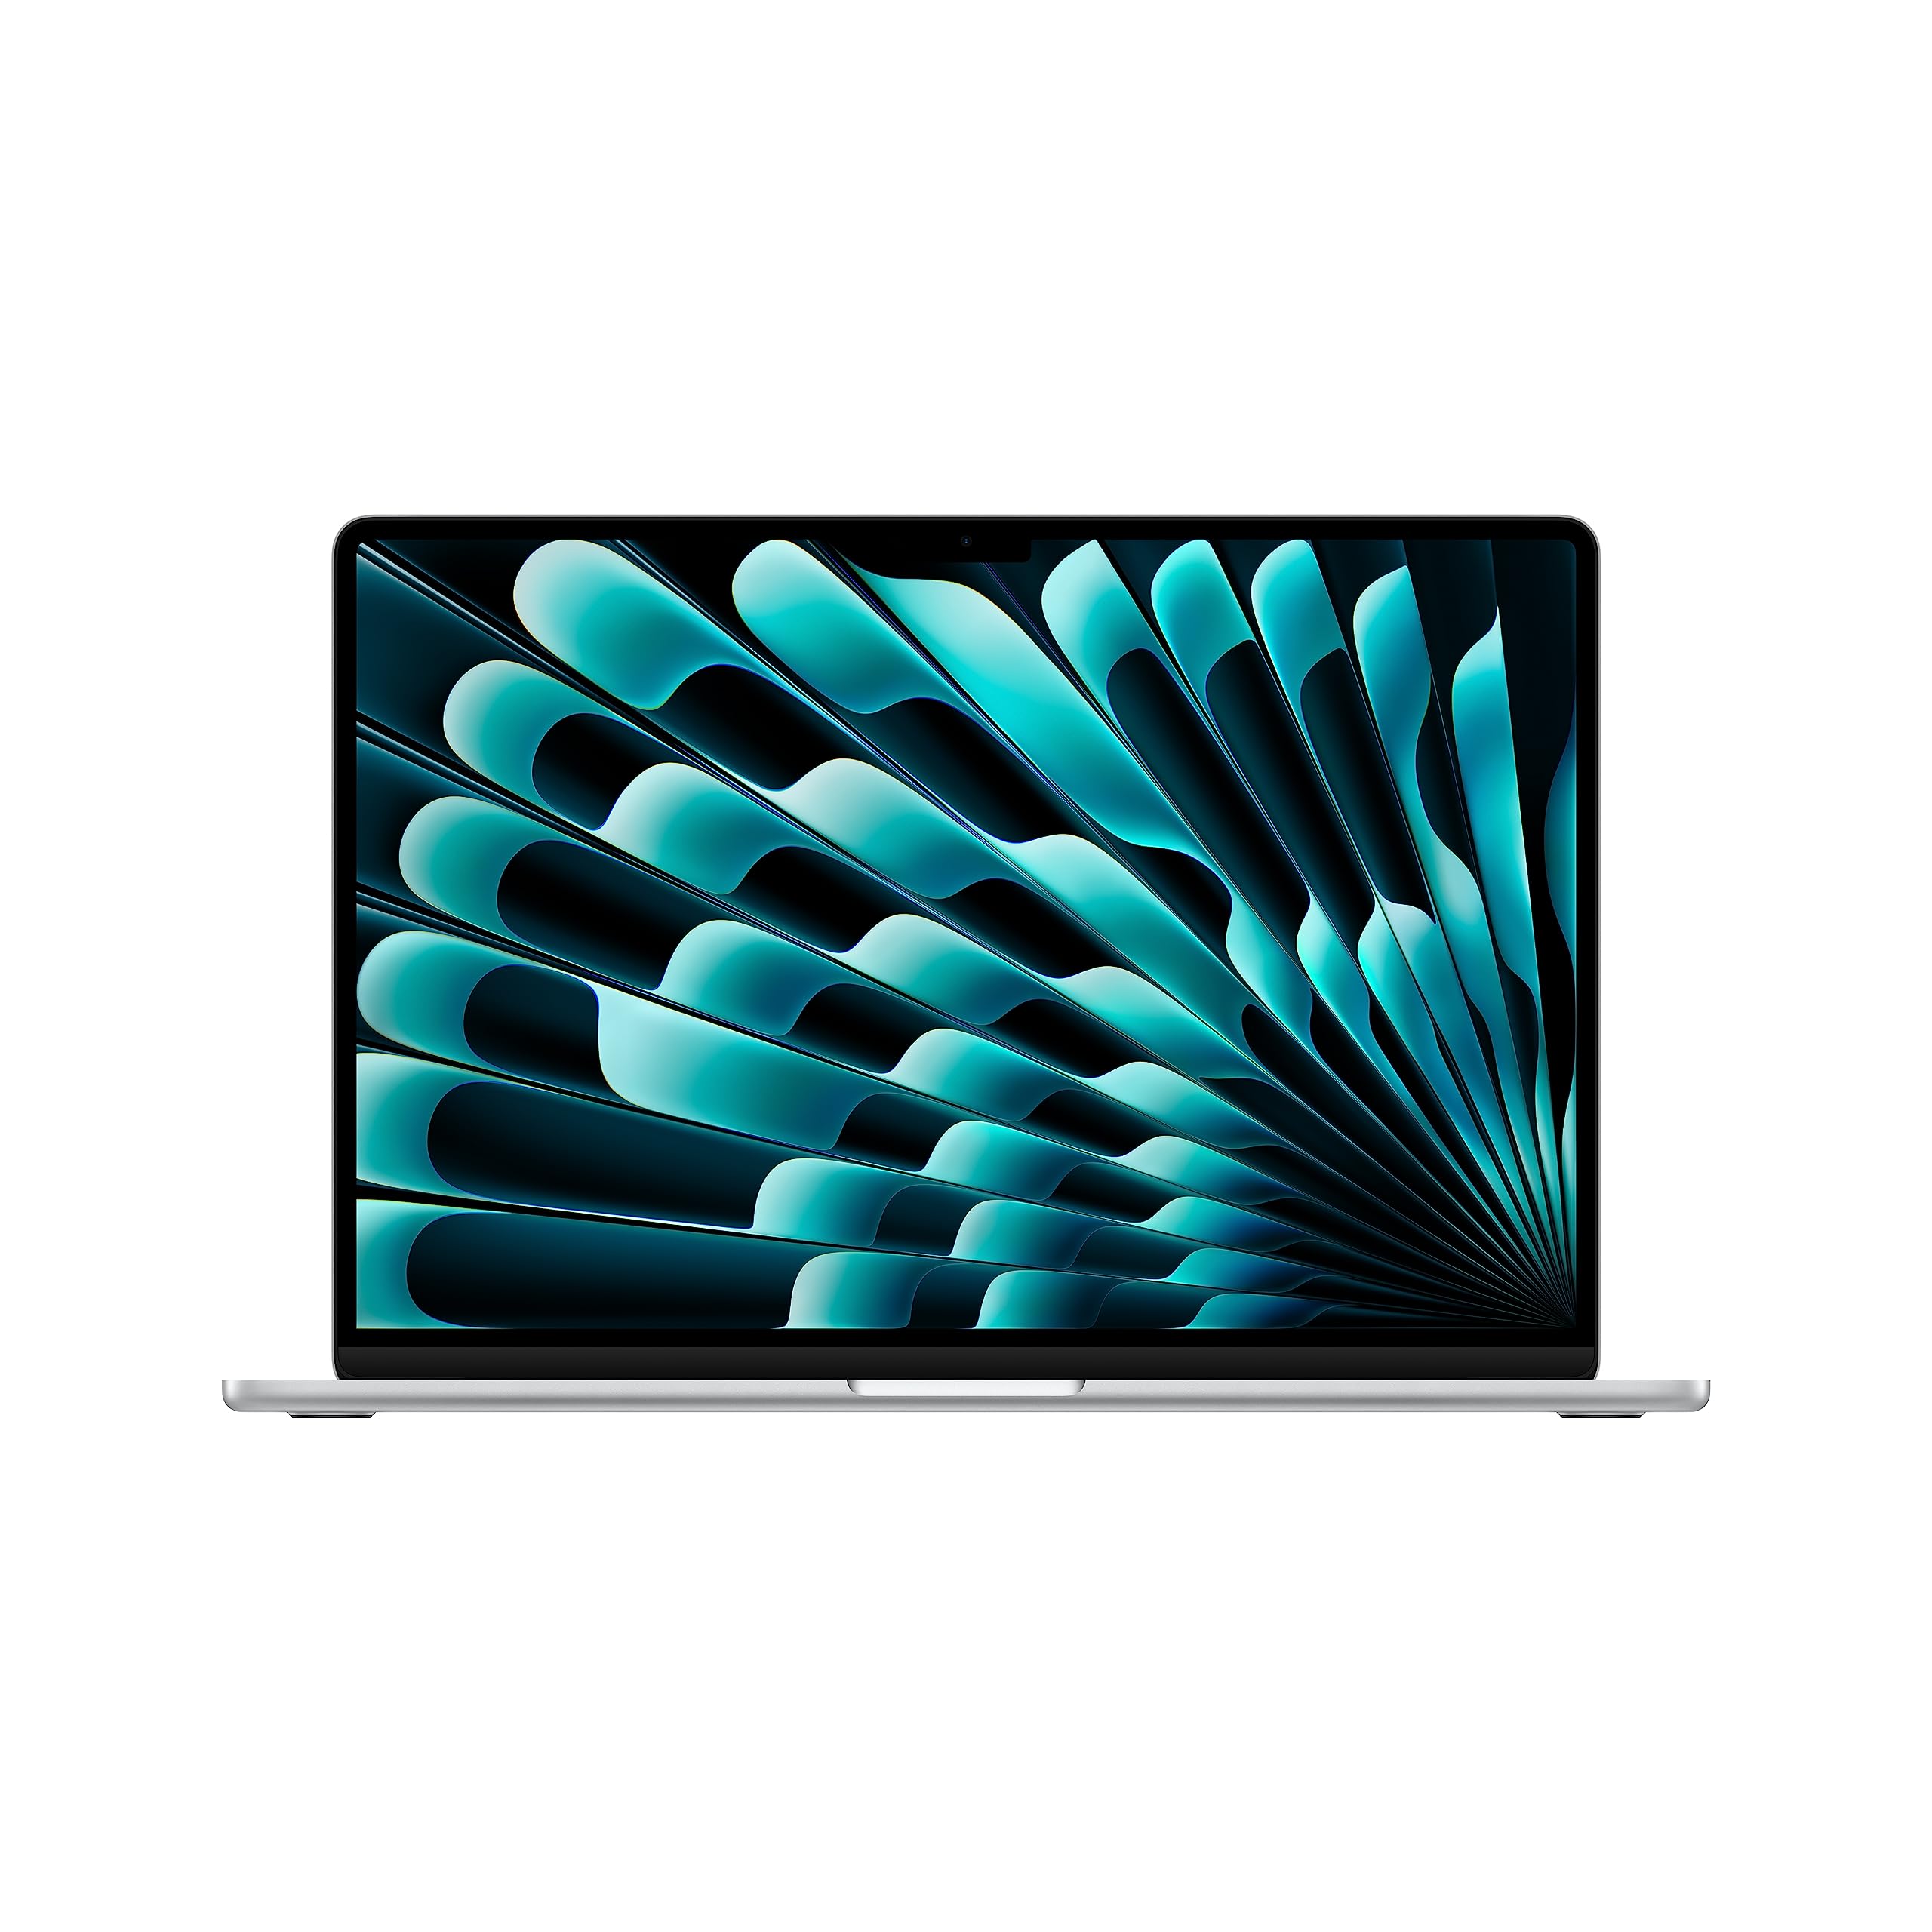 Apple 2023 MacBook Air Laptop with M2 chip: 15.3-inch Liquid Retina Display, 8GB Unified Memory, 512GB SSD Storage, 1080p FaceTime HD Camera, Touch ID. Works with iPhone/iPad